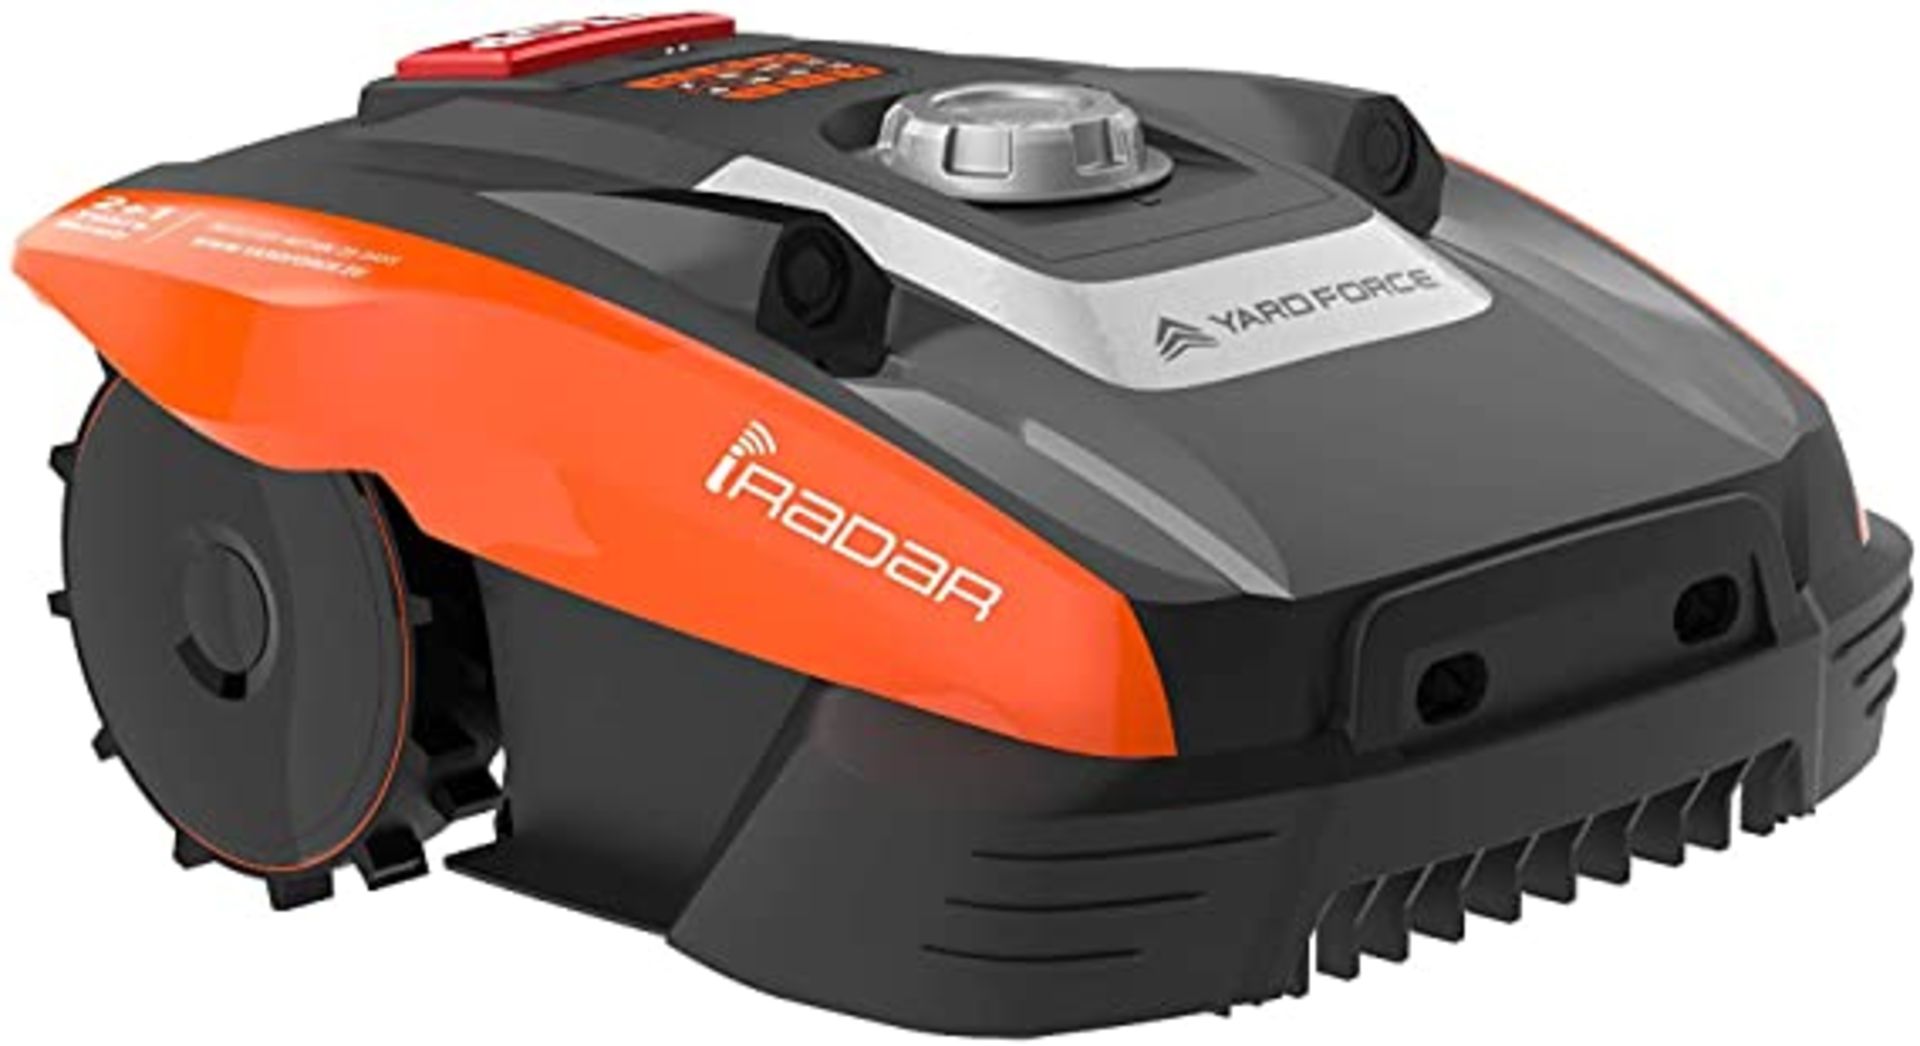 (R15A) 1x Yardforce Compact 280R Robotic Brushless Mower RRP £349.99. Unit Clean, Appears As New. - Image 2 of 4